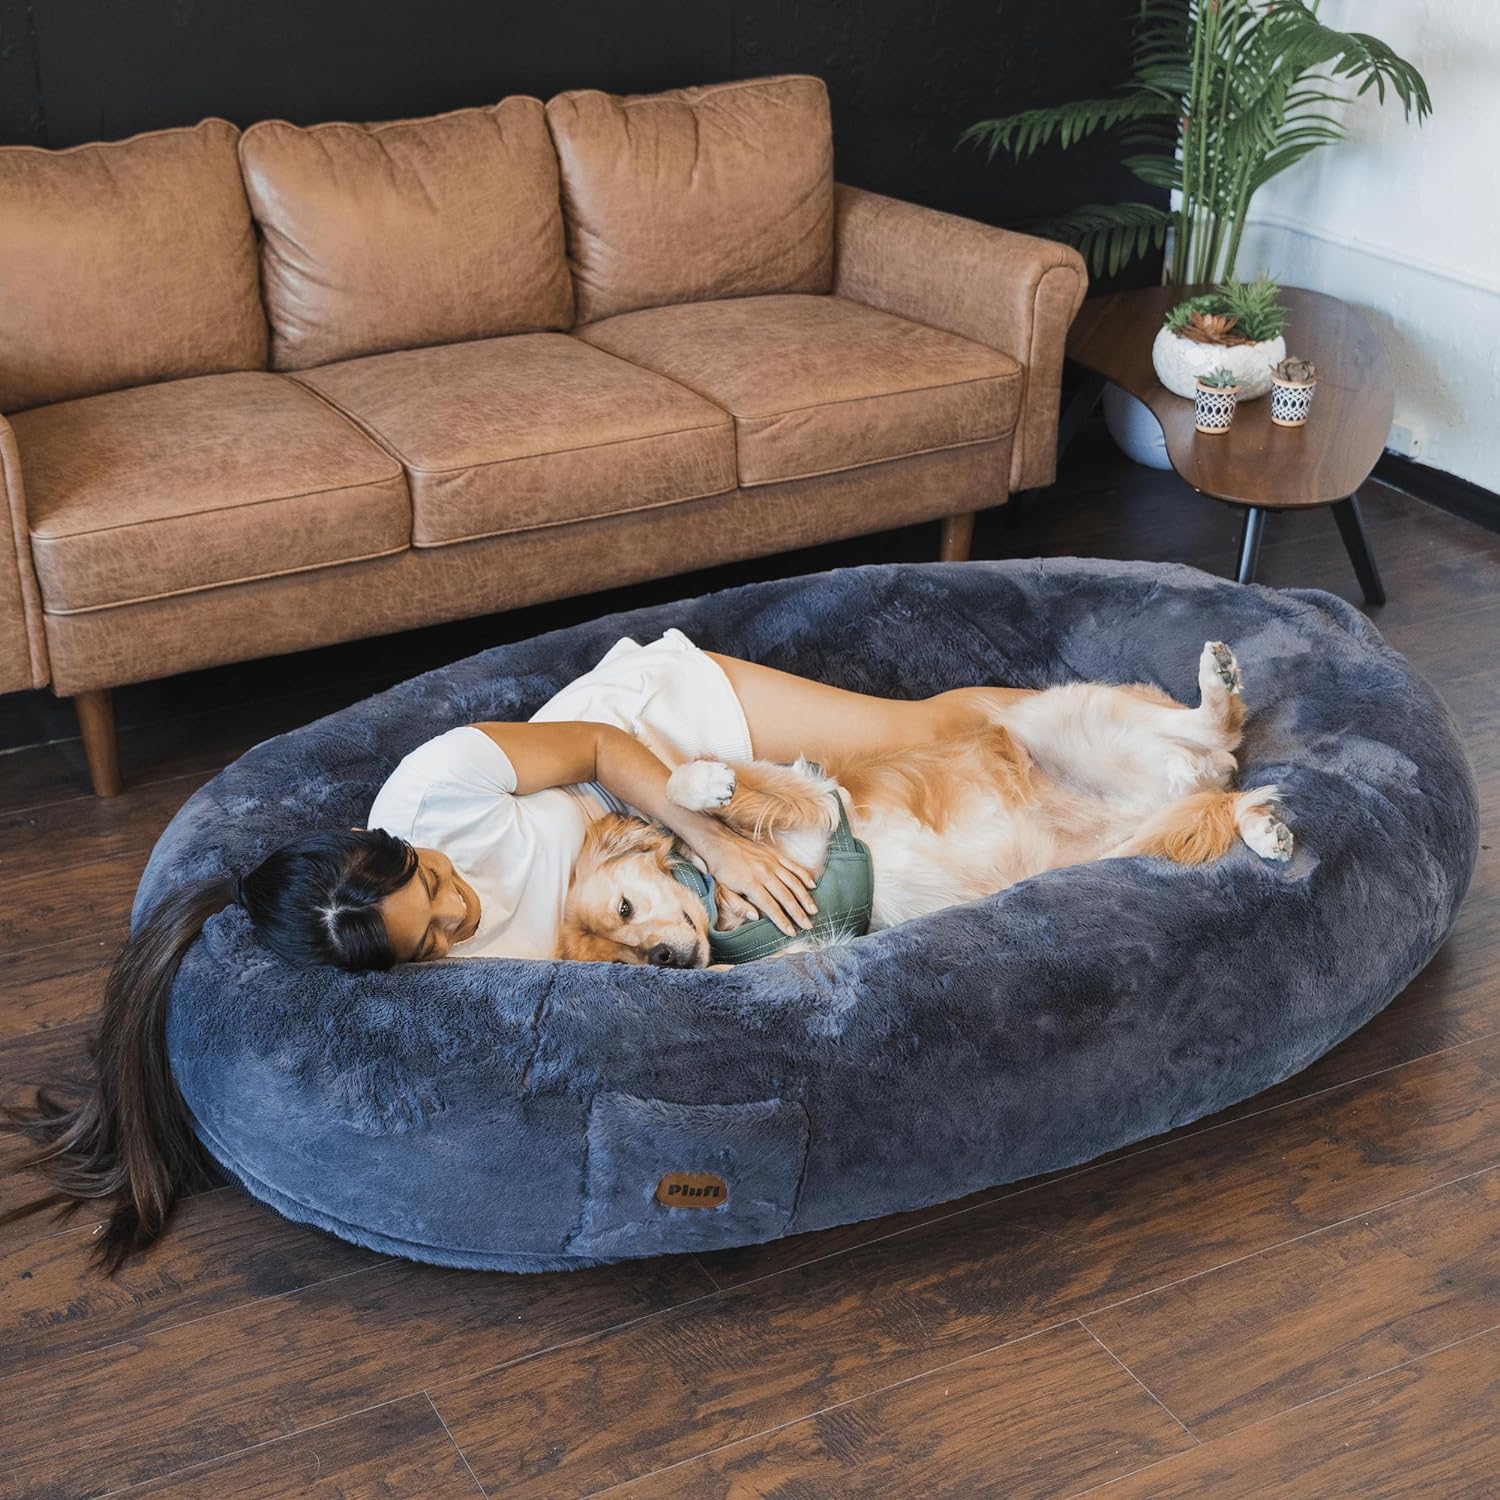 Plufl, The Original Human Dog Bed for Adults, Kids, and Pets. As Seen on Shark Tank. Comfy Plush Large Bean Bag with Memory Foam, Machine Washable, and Durable. Perfect nap and Floor Bed - Black